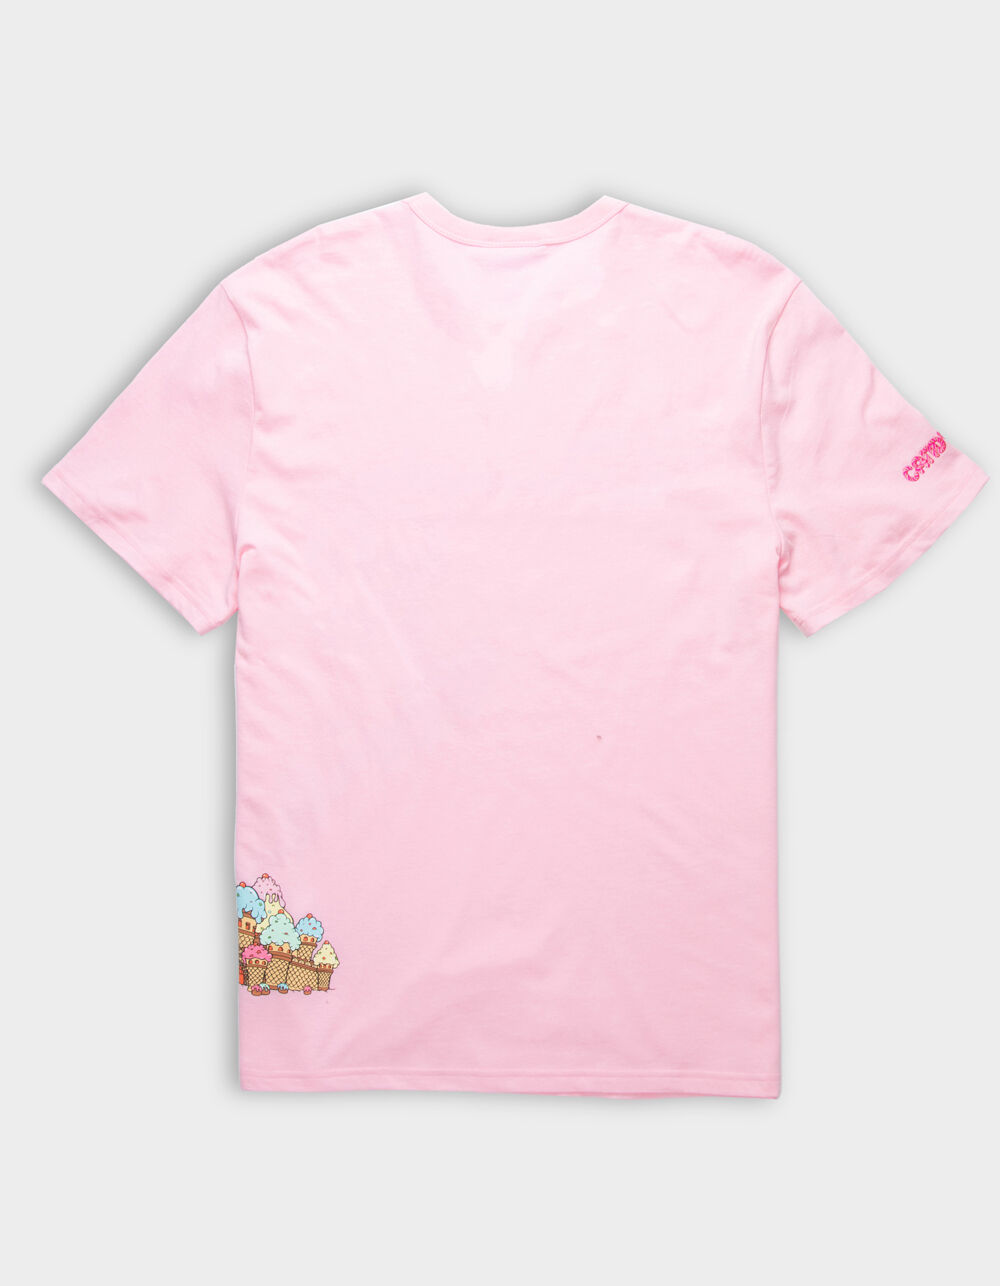 CHAMPION x Candy Land Mens Tee - PINK | Tillys